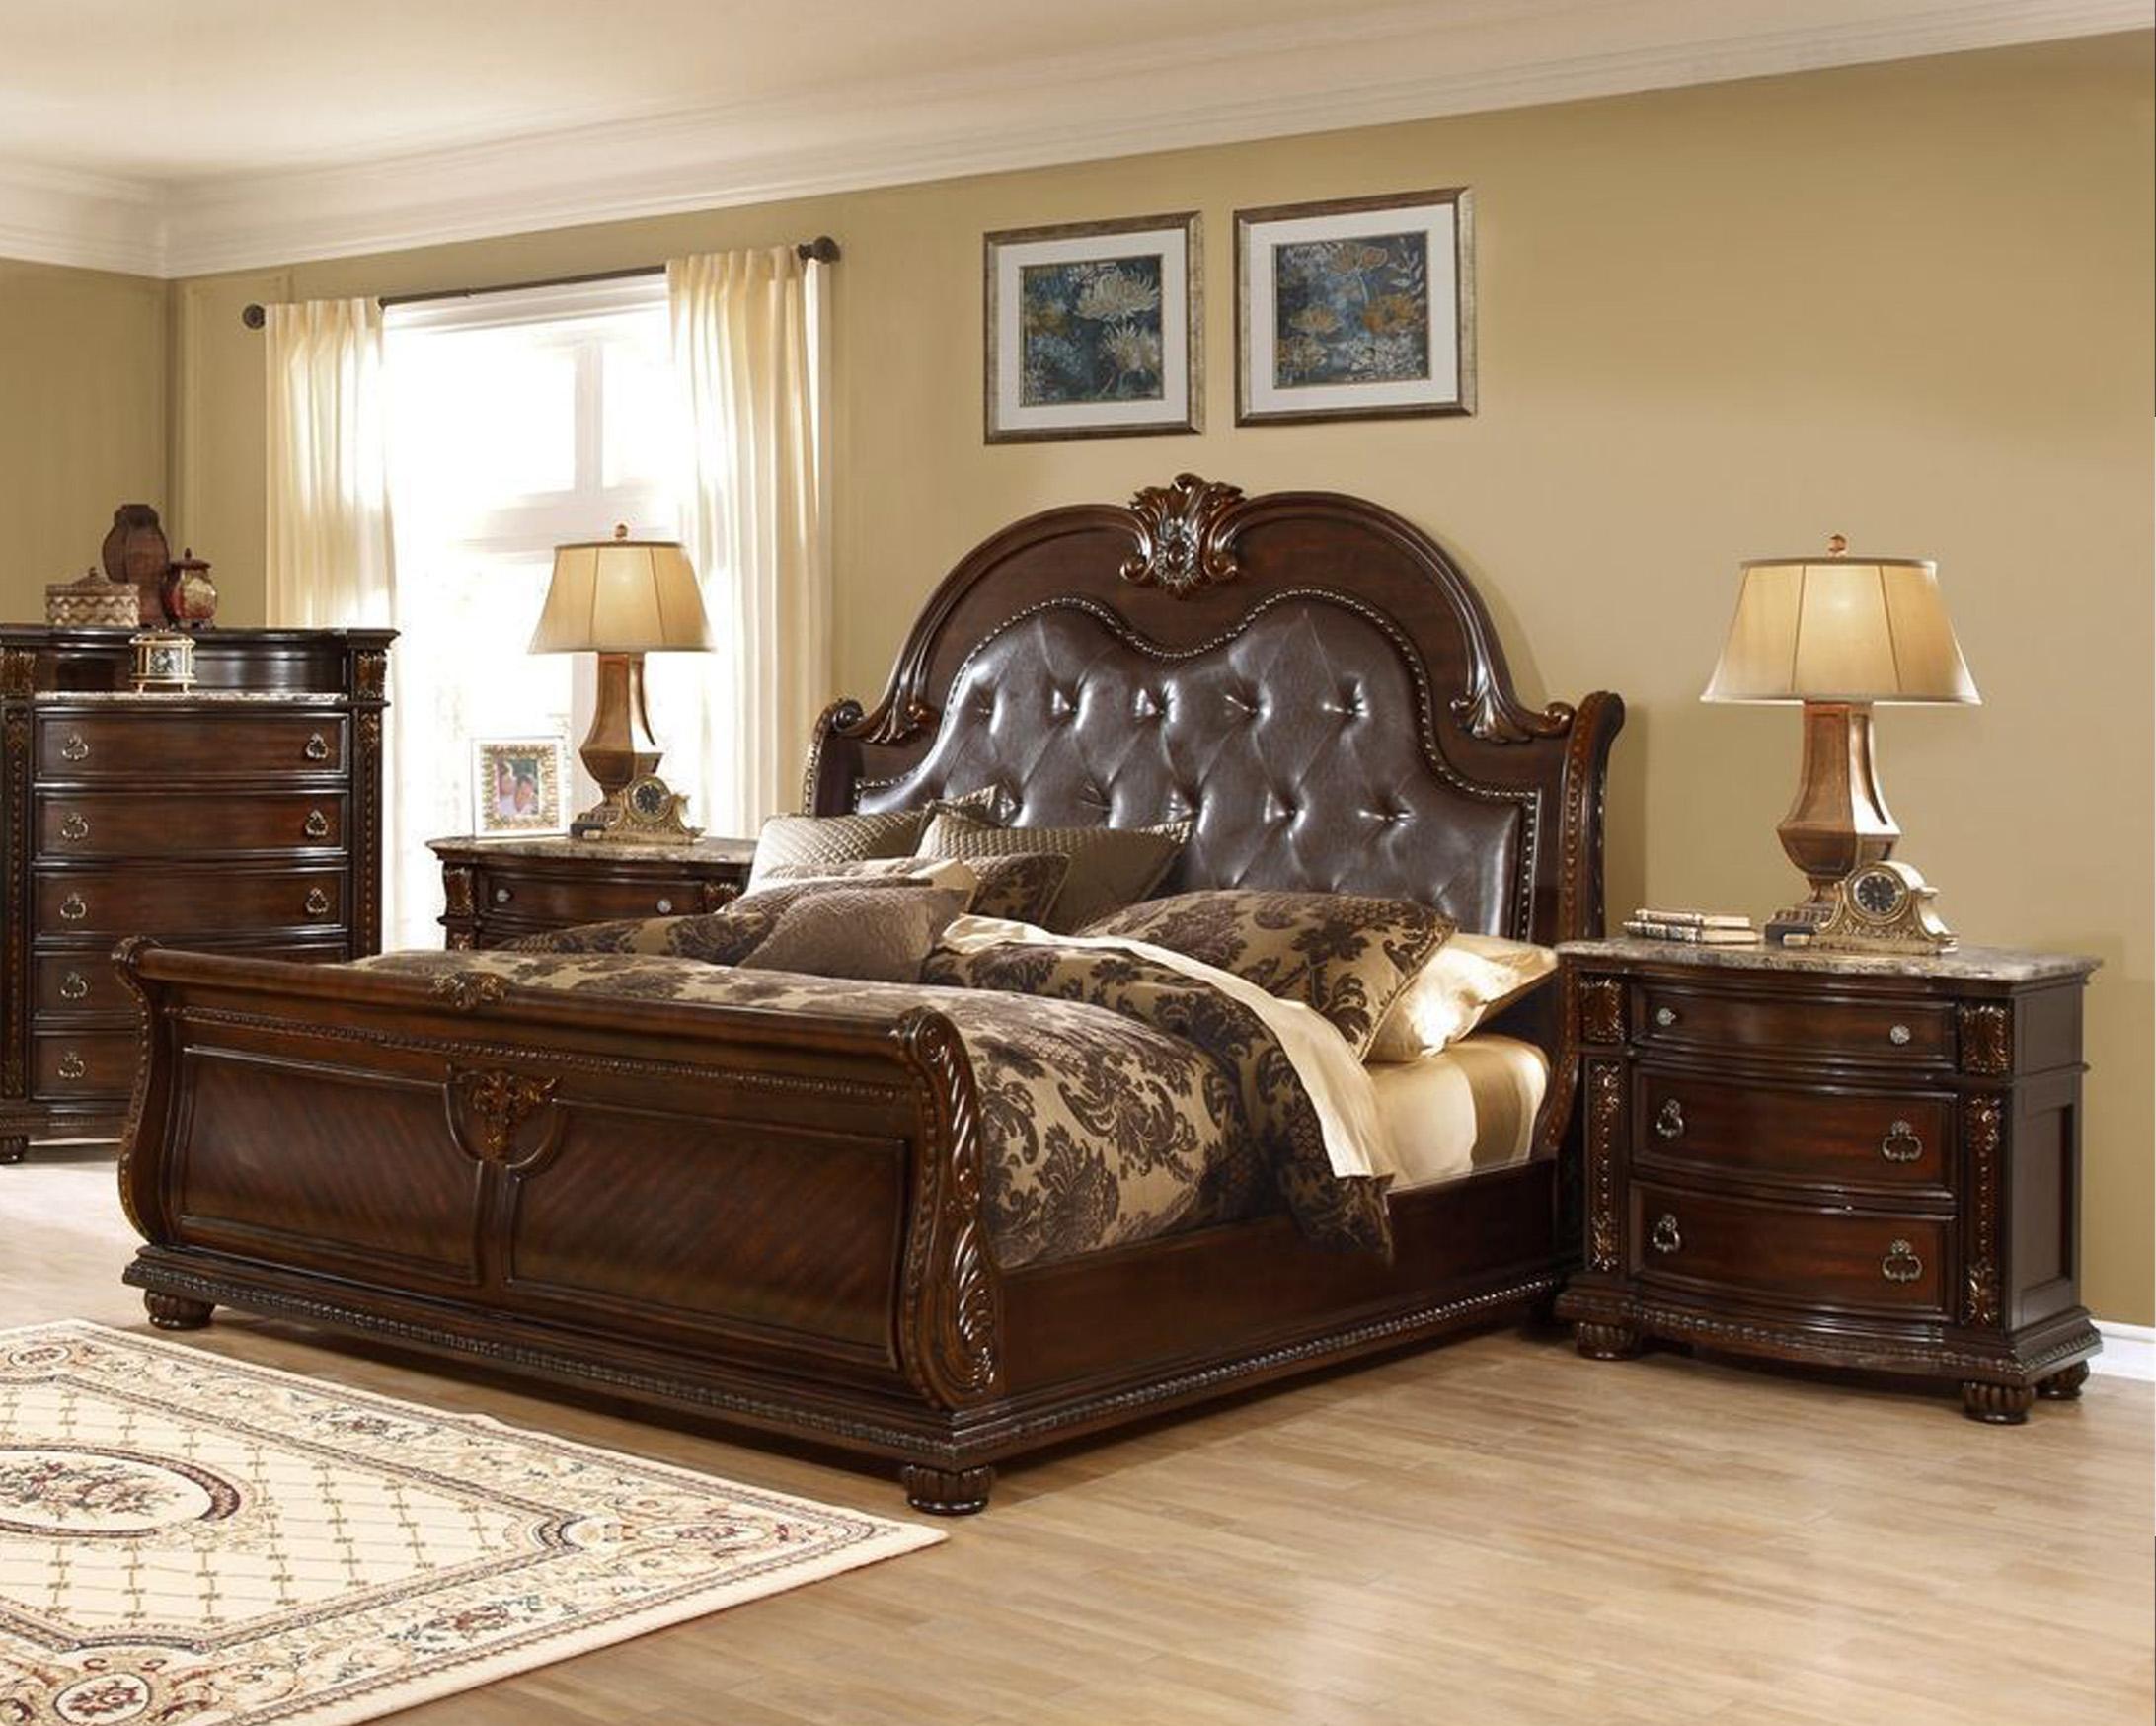 Classic, Traditional Sleigh Bedroom Set B9505 B9505-Q-N-2PC in Dark Cherry Bonded Leather